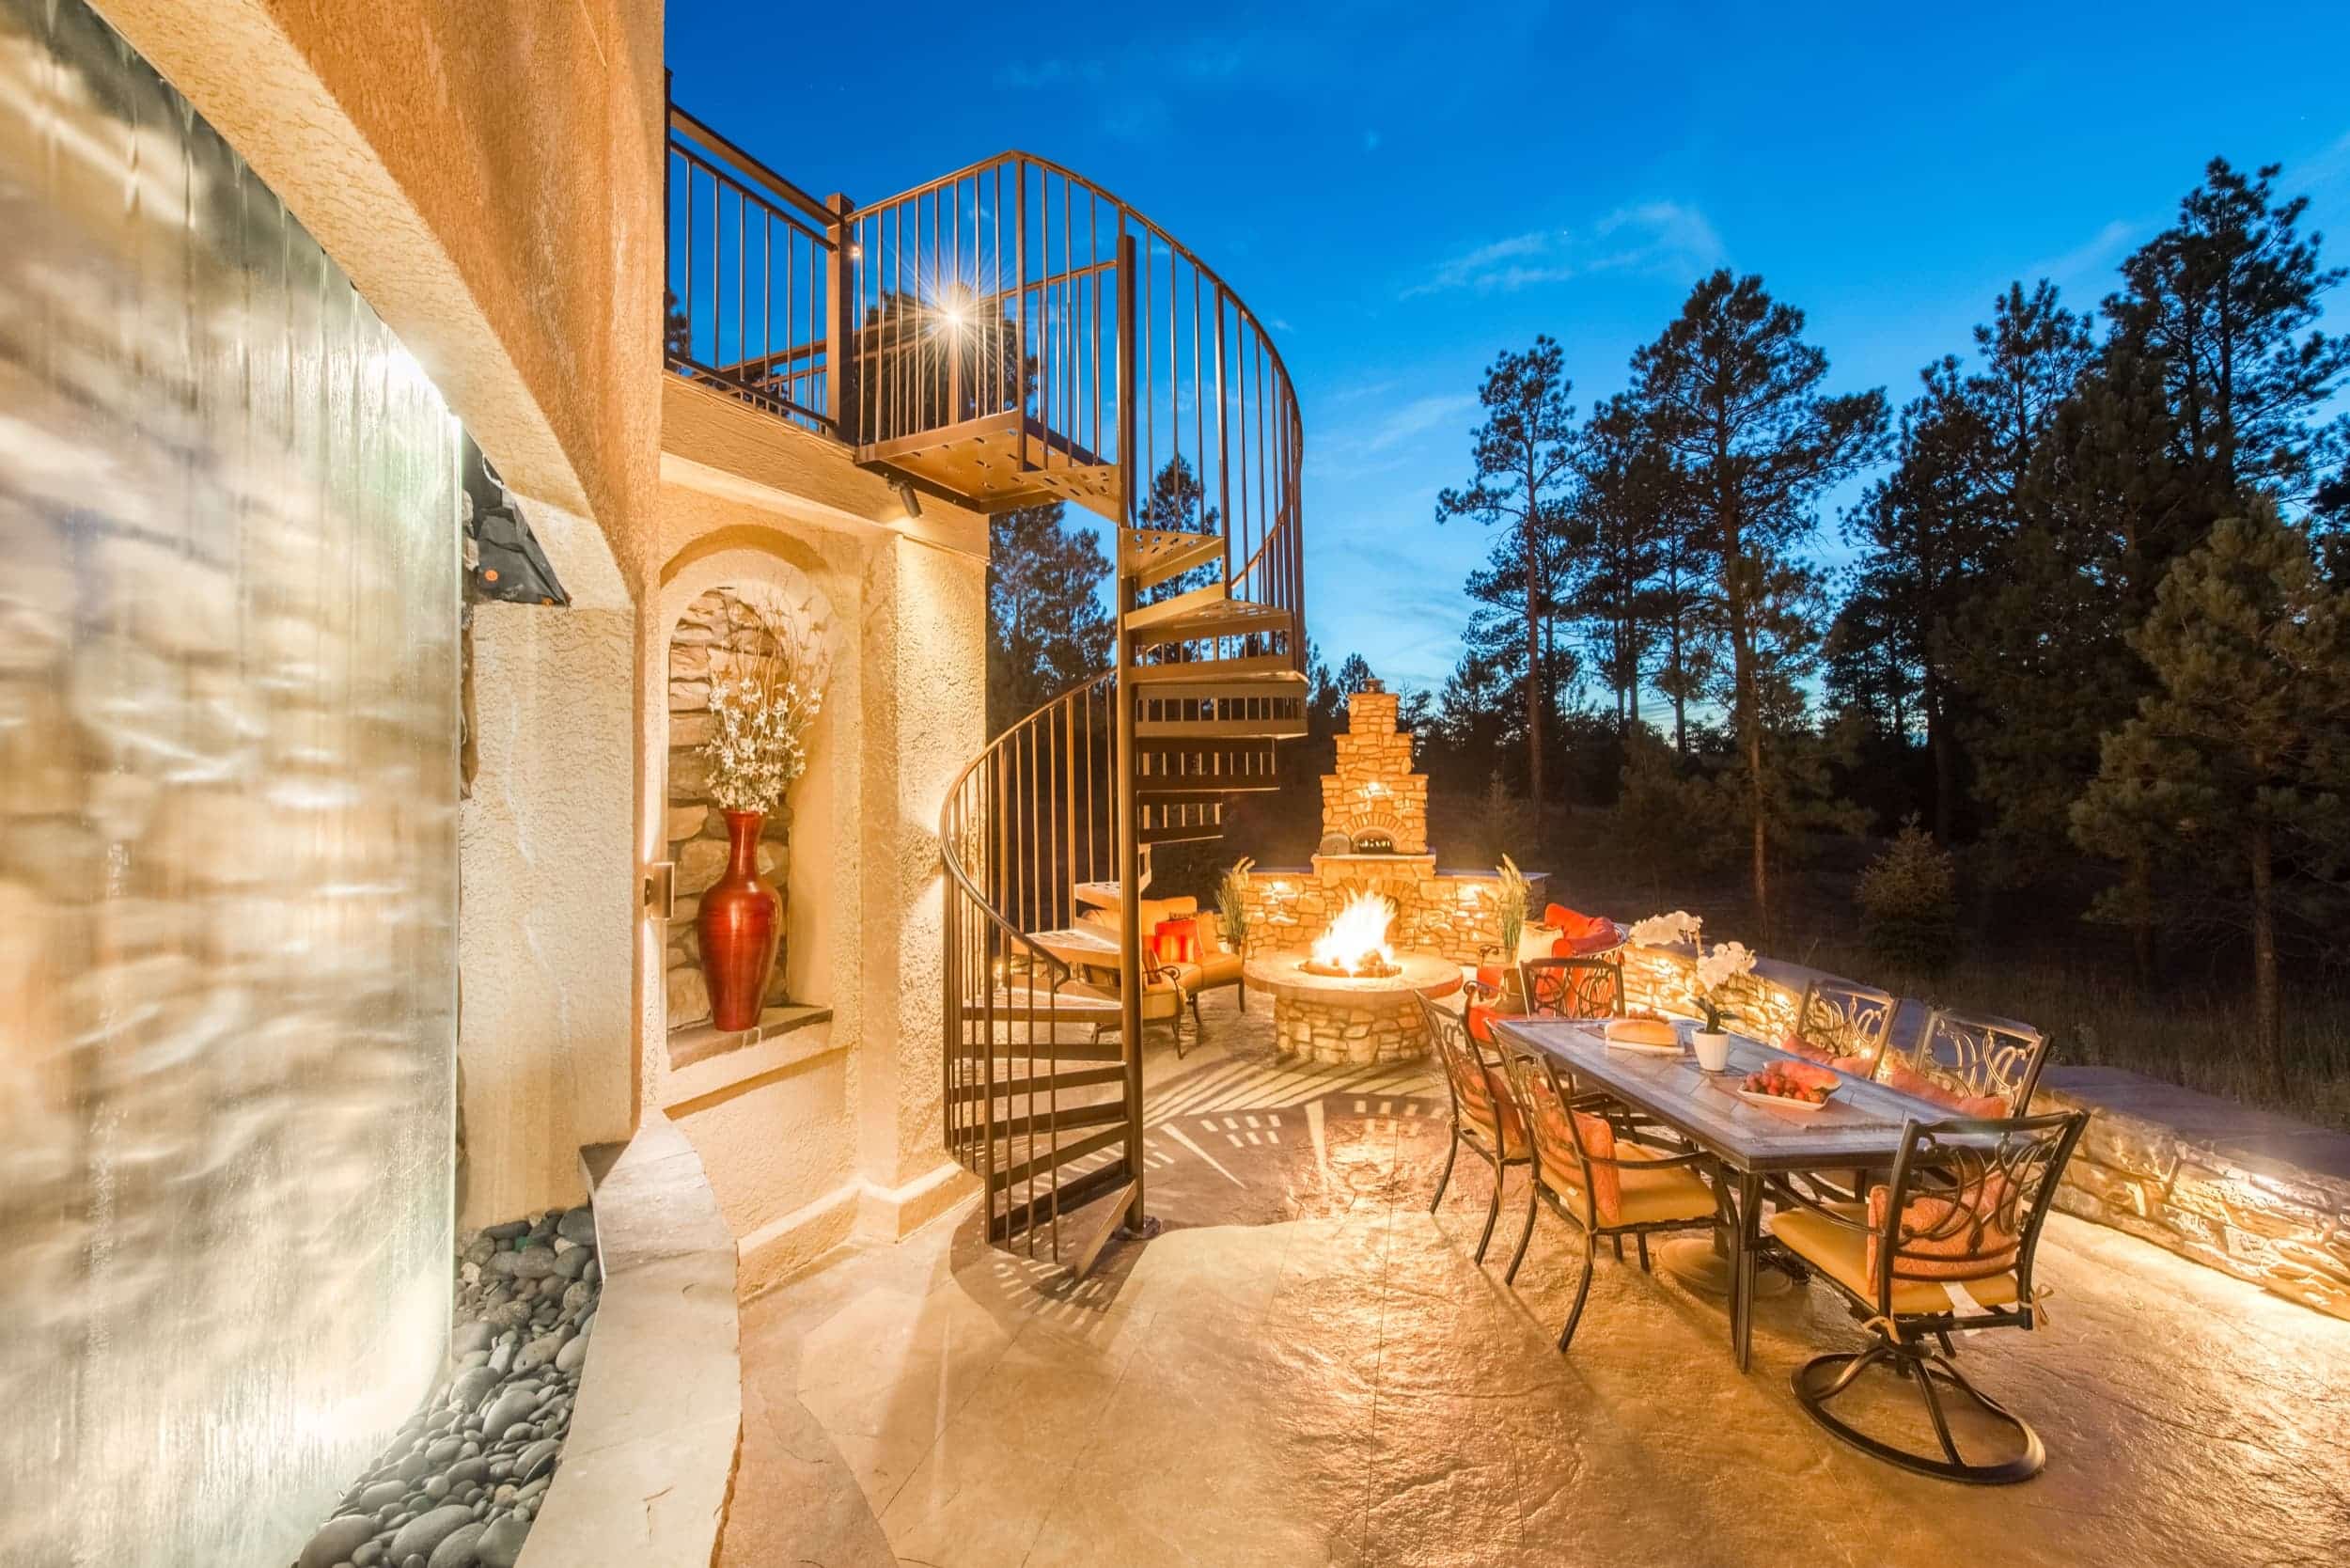 An outdoor dining area with a fire pit and waterfall.